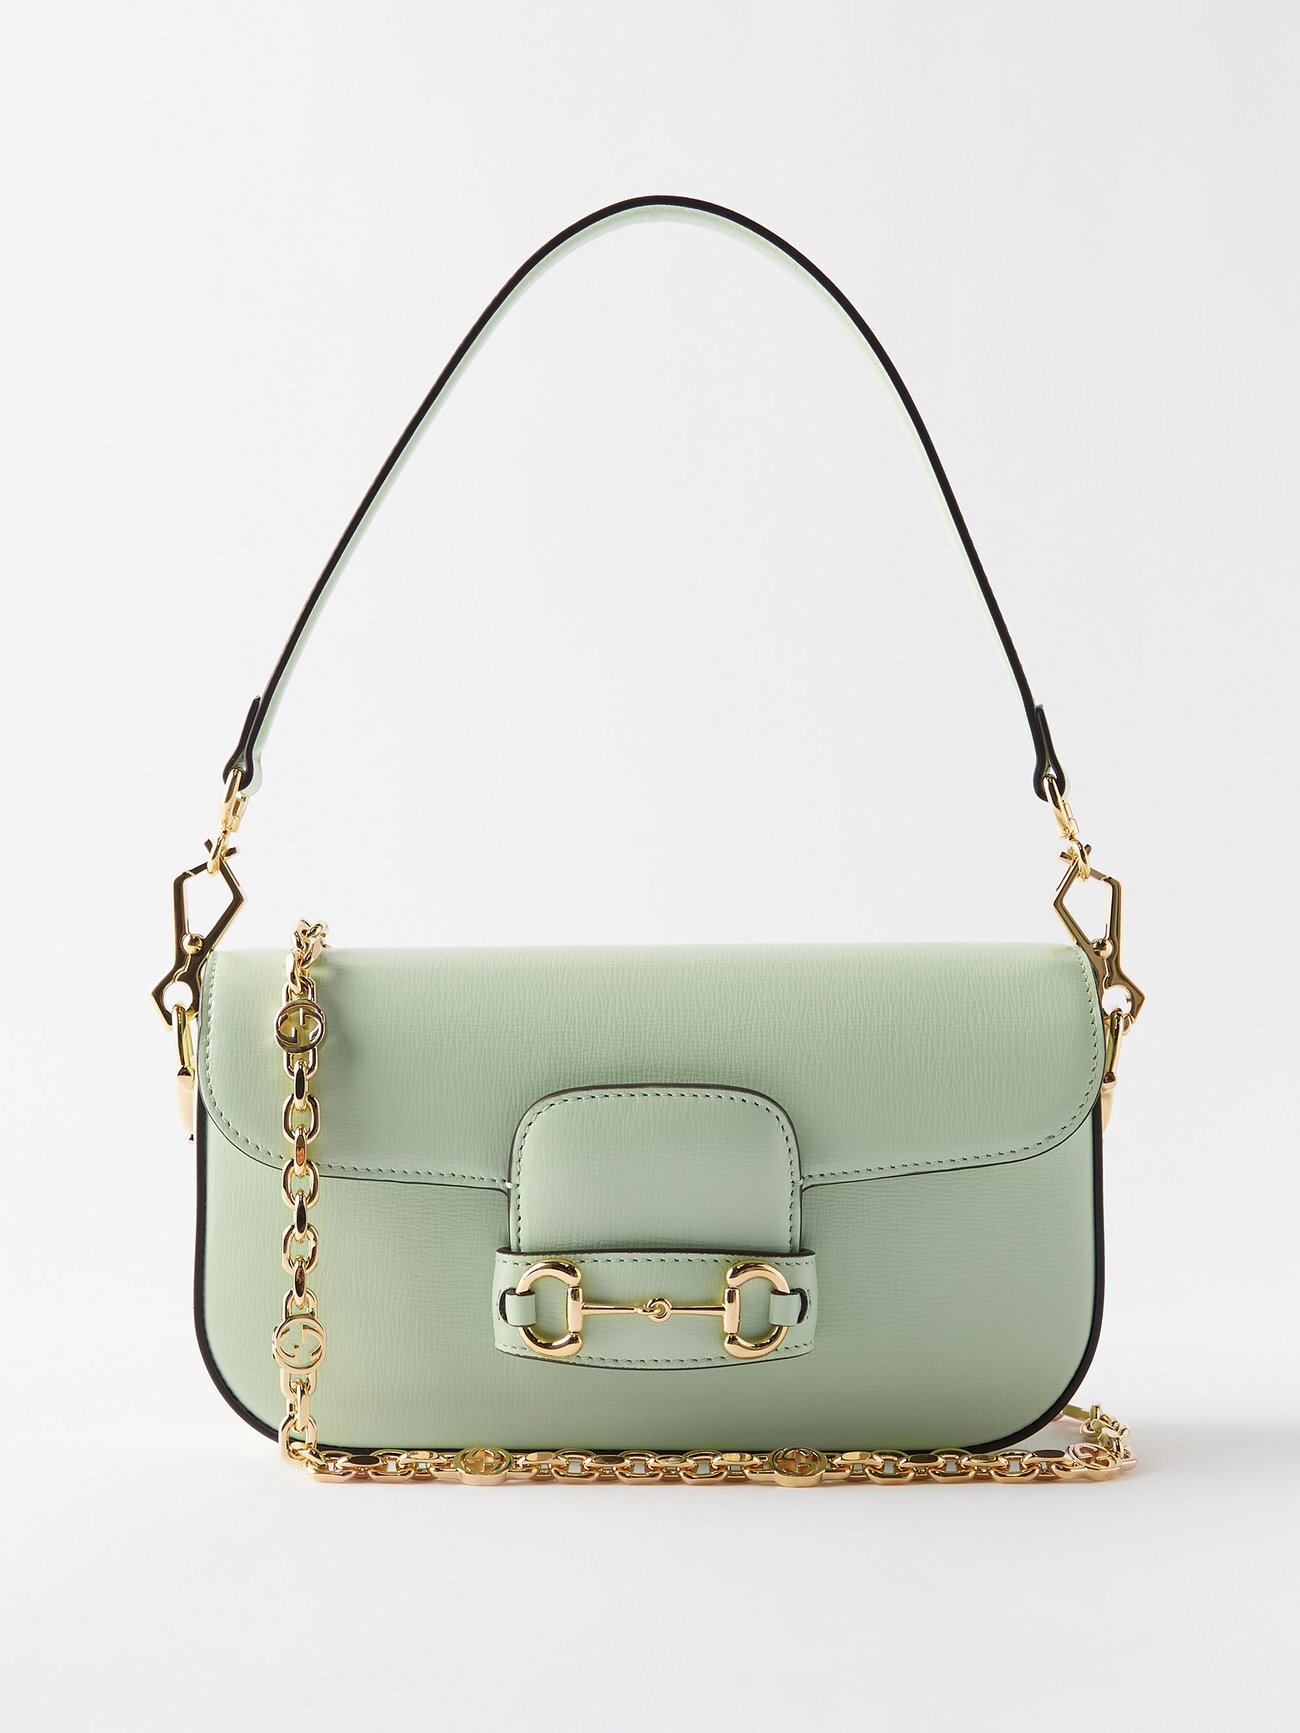 Gucci - 1995 Horsebit Small Grained-leather Shoulder Bag - Womens - Light Green